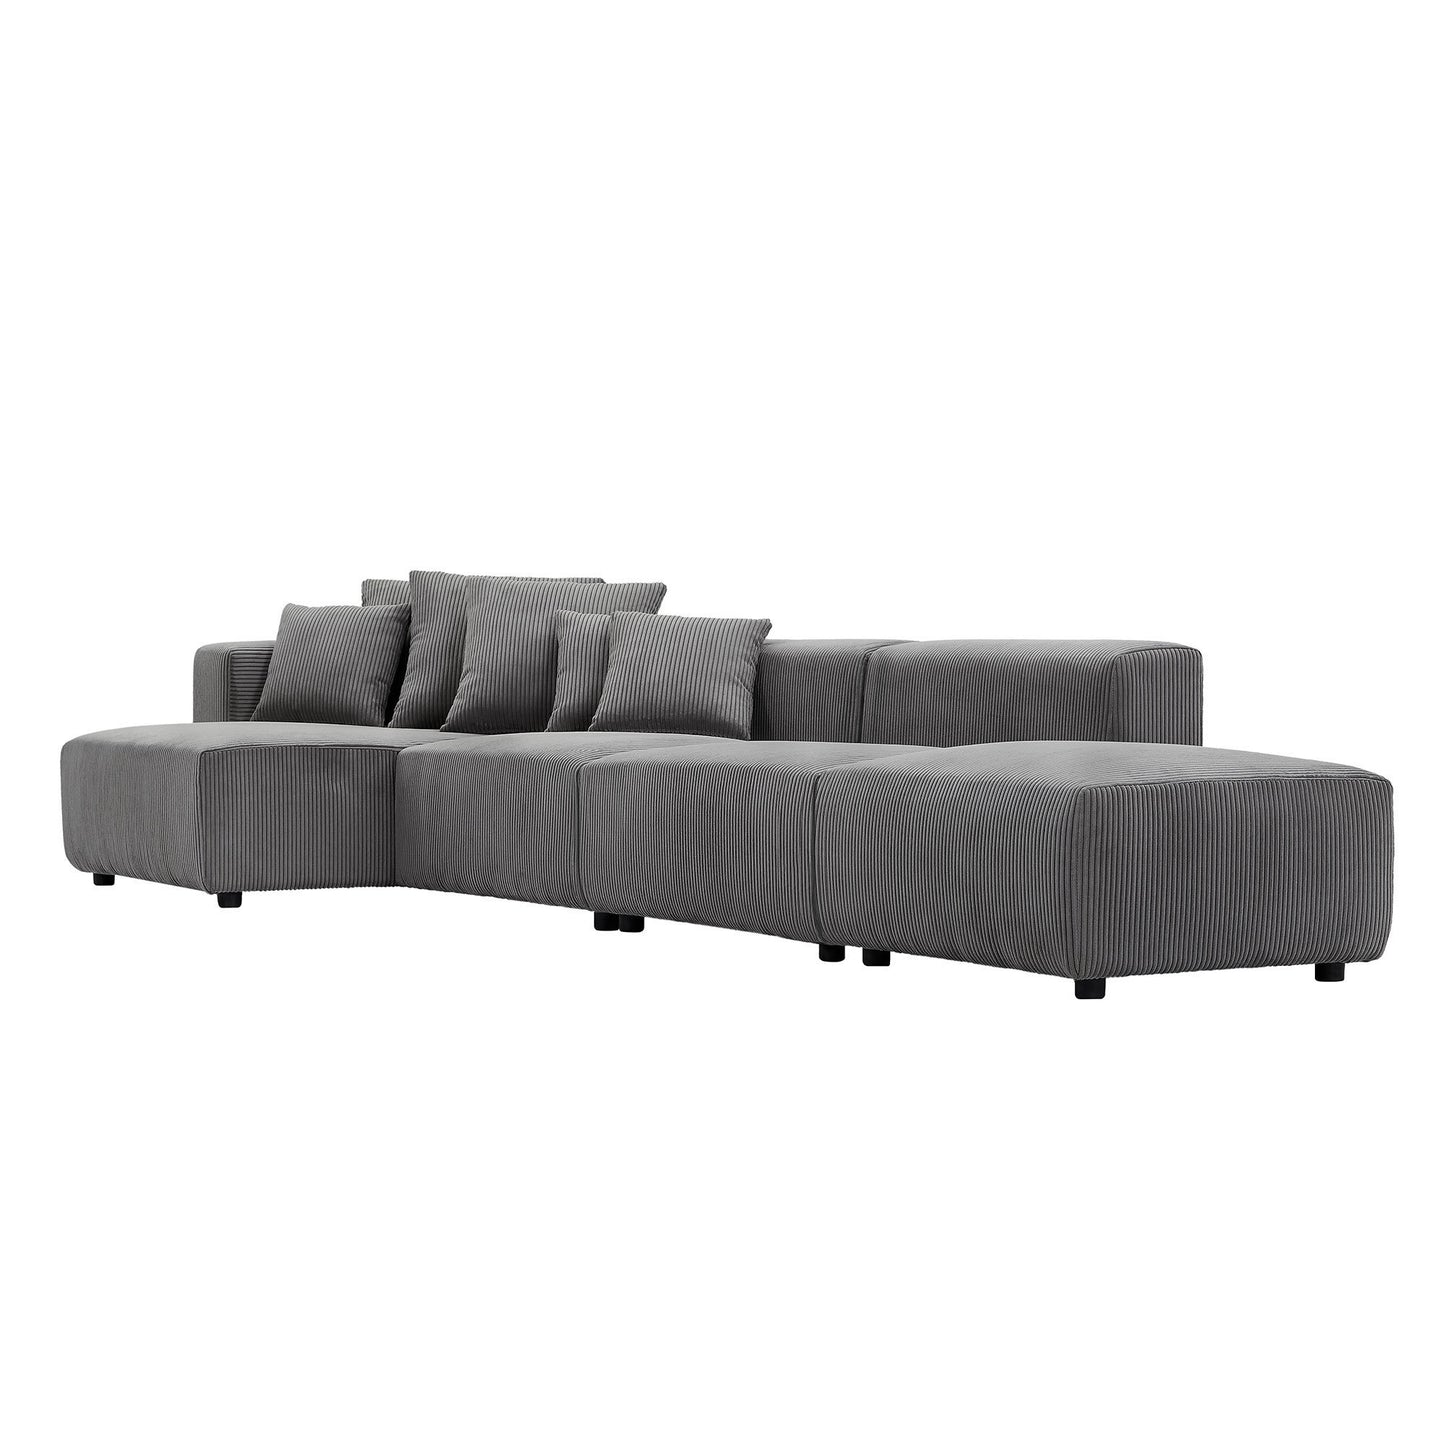 Soft Corduroy Sectional Modular Sofa 4 Piece Set, Small L-Shaped Chaise Couch for Living Room, Apartment, Office, Gray